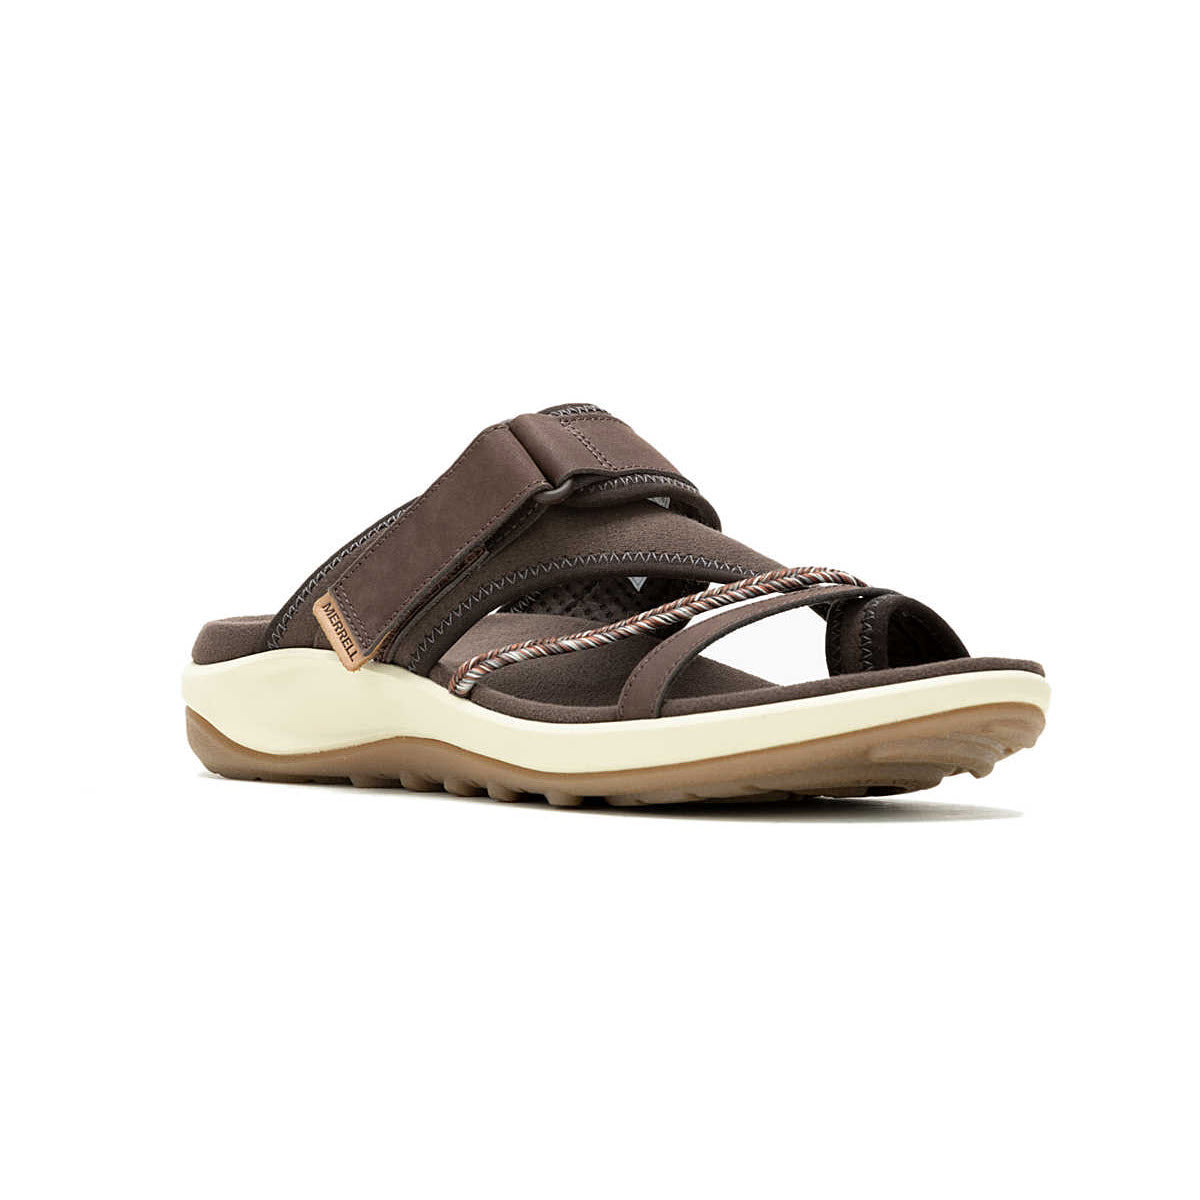 Brown and tan Merrell Terran 4 Slide Bracken sandal with a cushioned sole and multiple straps, displayed against a white background.